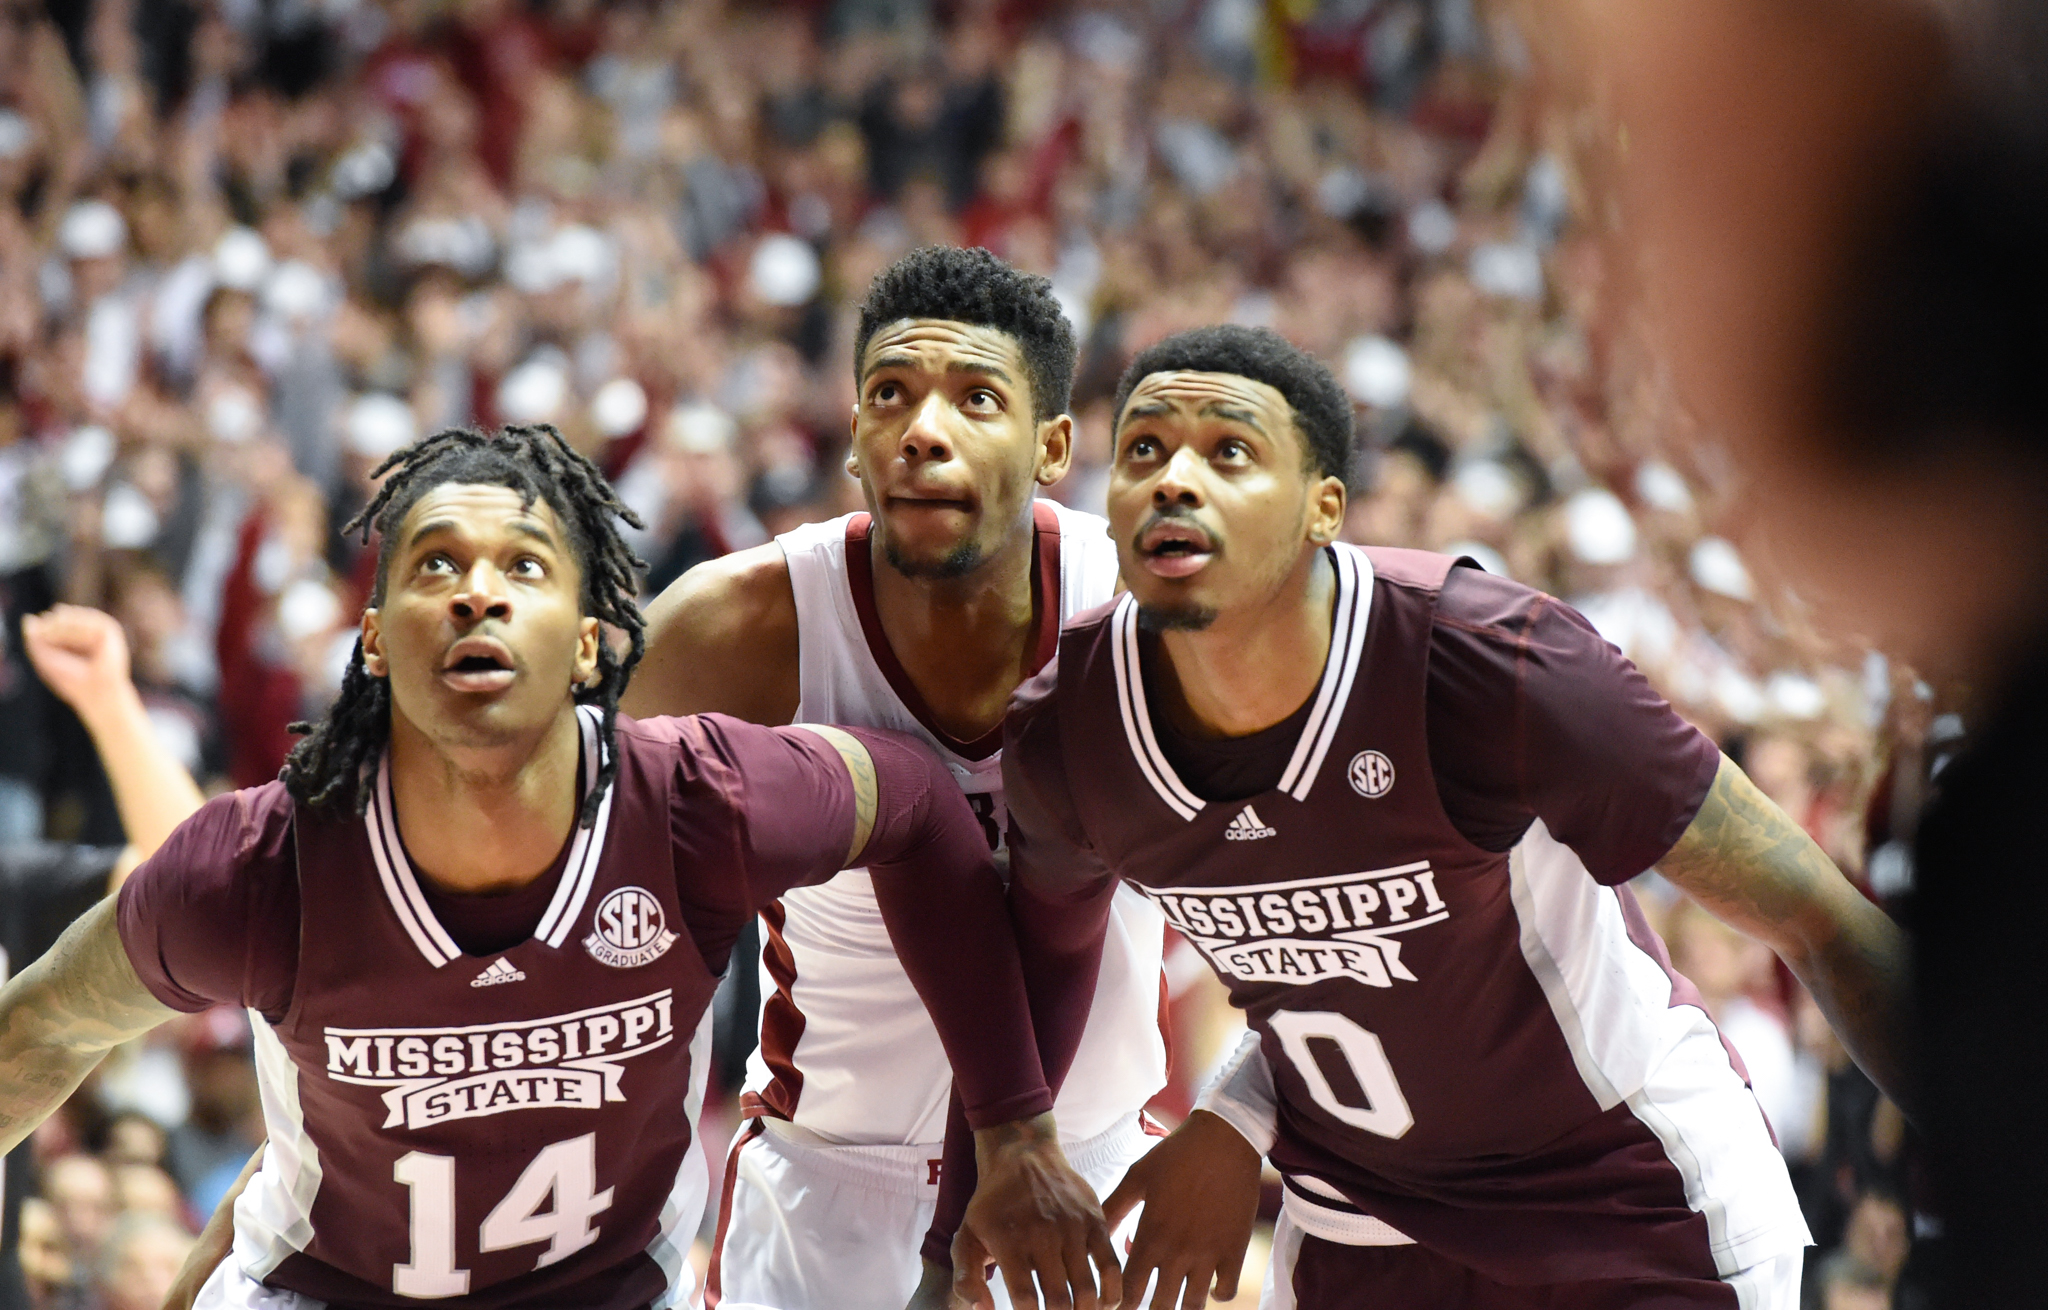 What channel is the mississippi state basketball game on tonight vs. pitt?